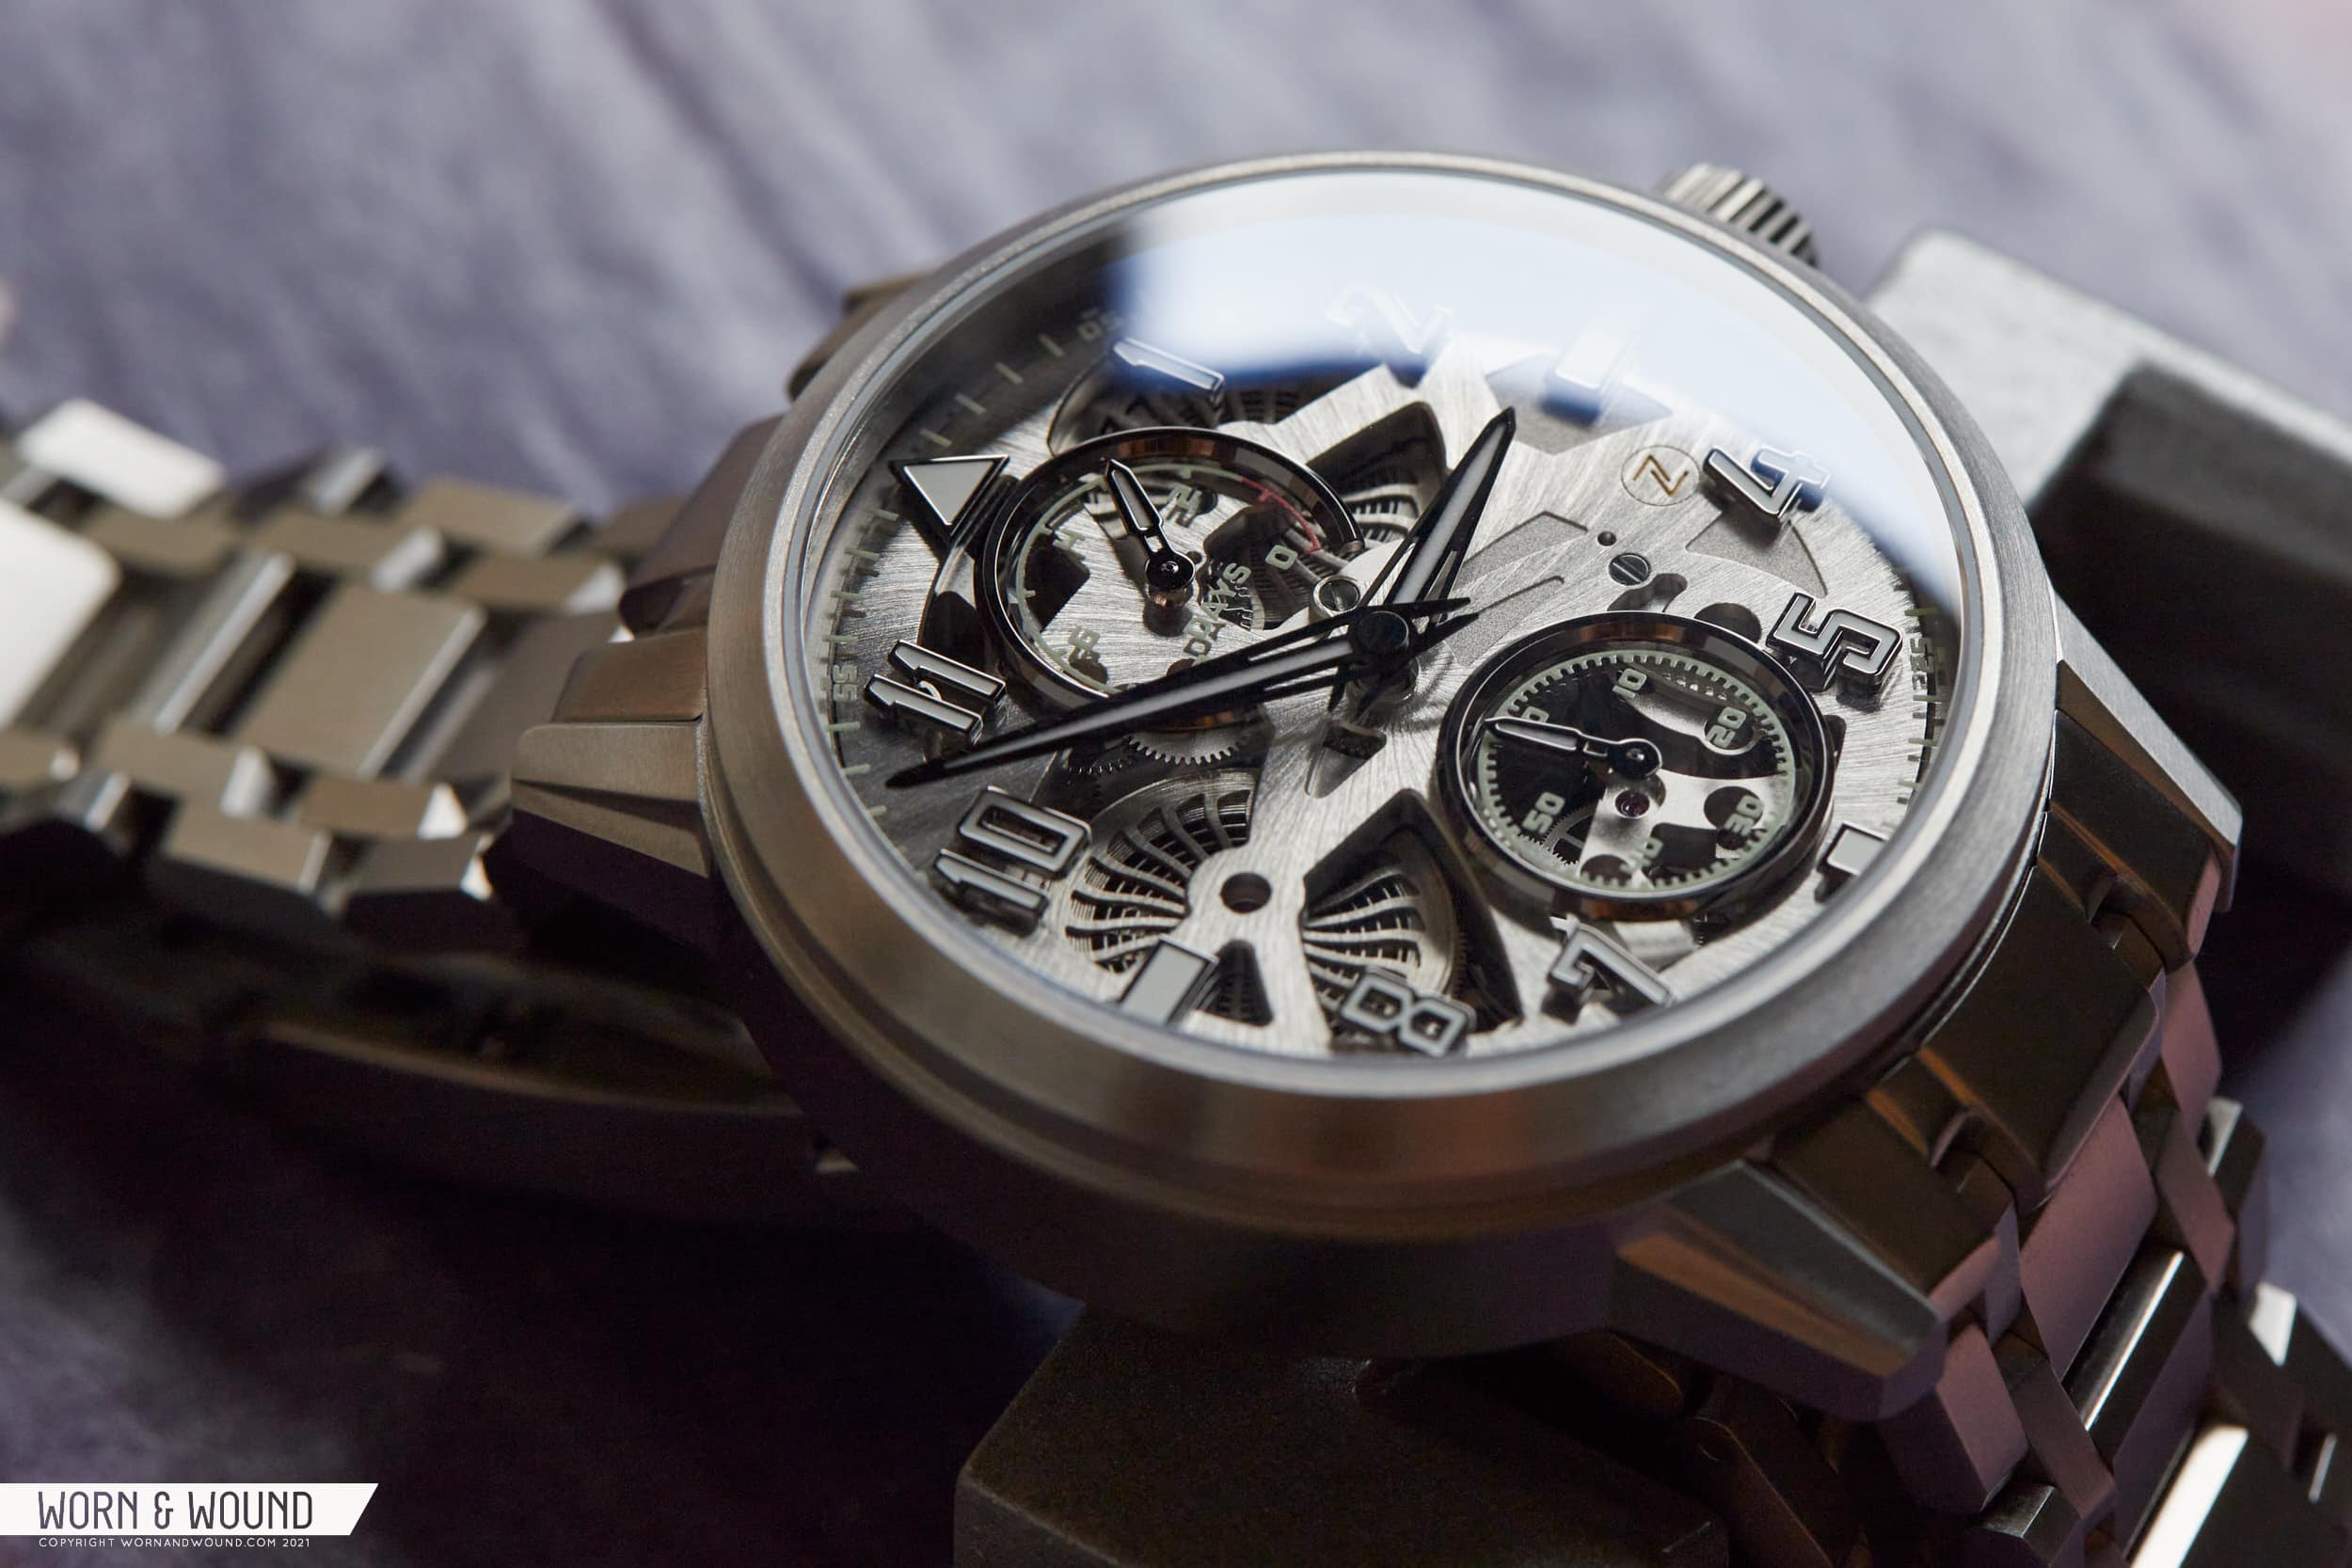 Introducing the Zelos Mirage 2, Featuring an 8 Day Handwound Movement